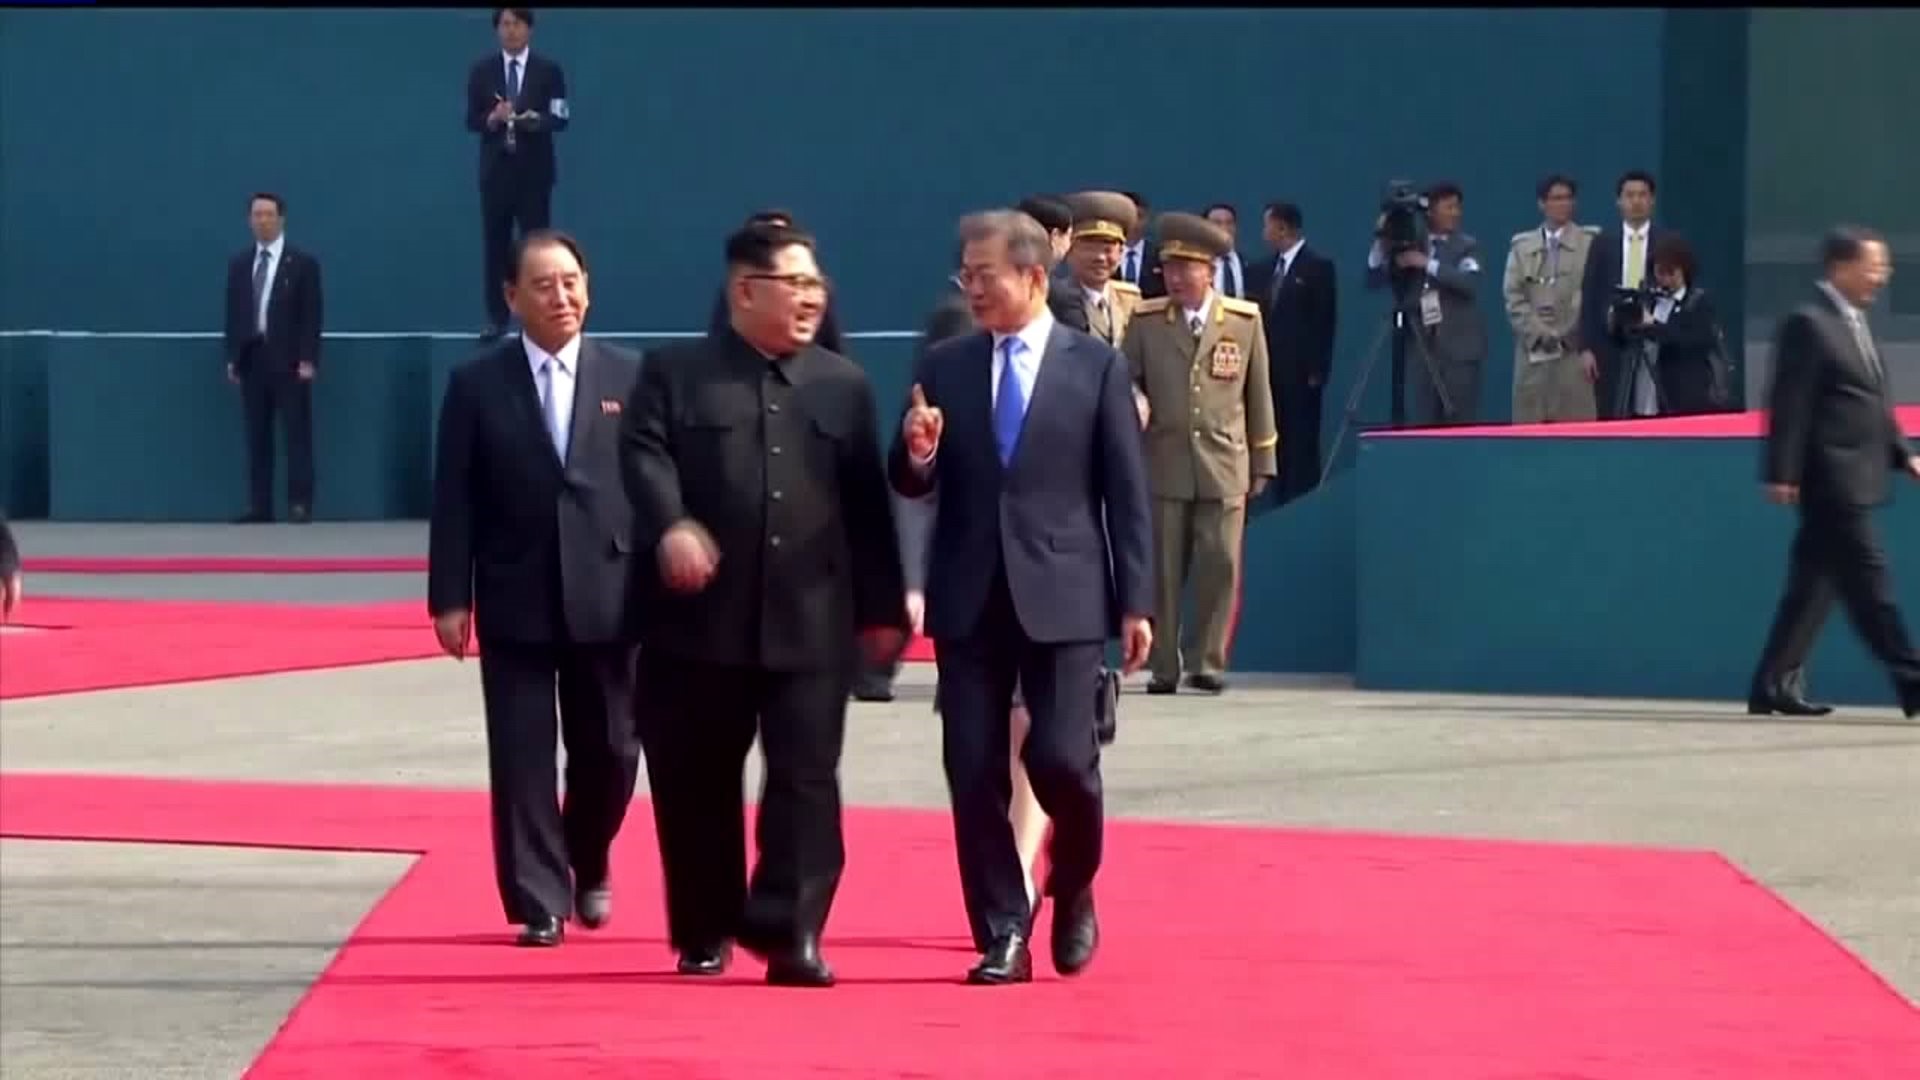 `My heart was pounding` -Reaction to North and South Korea Meeting